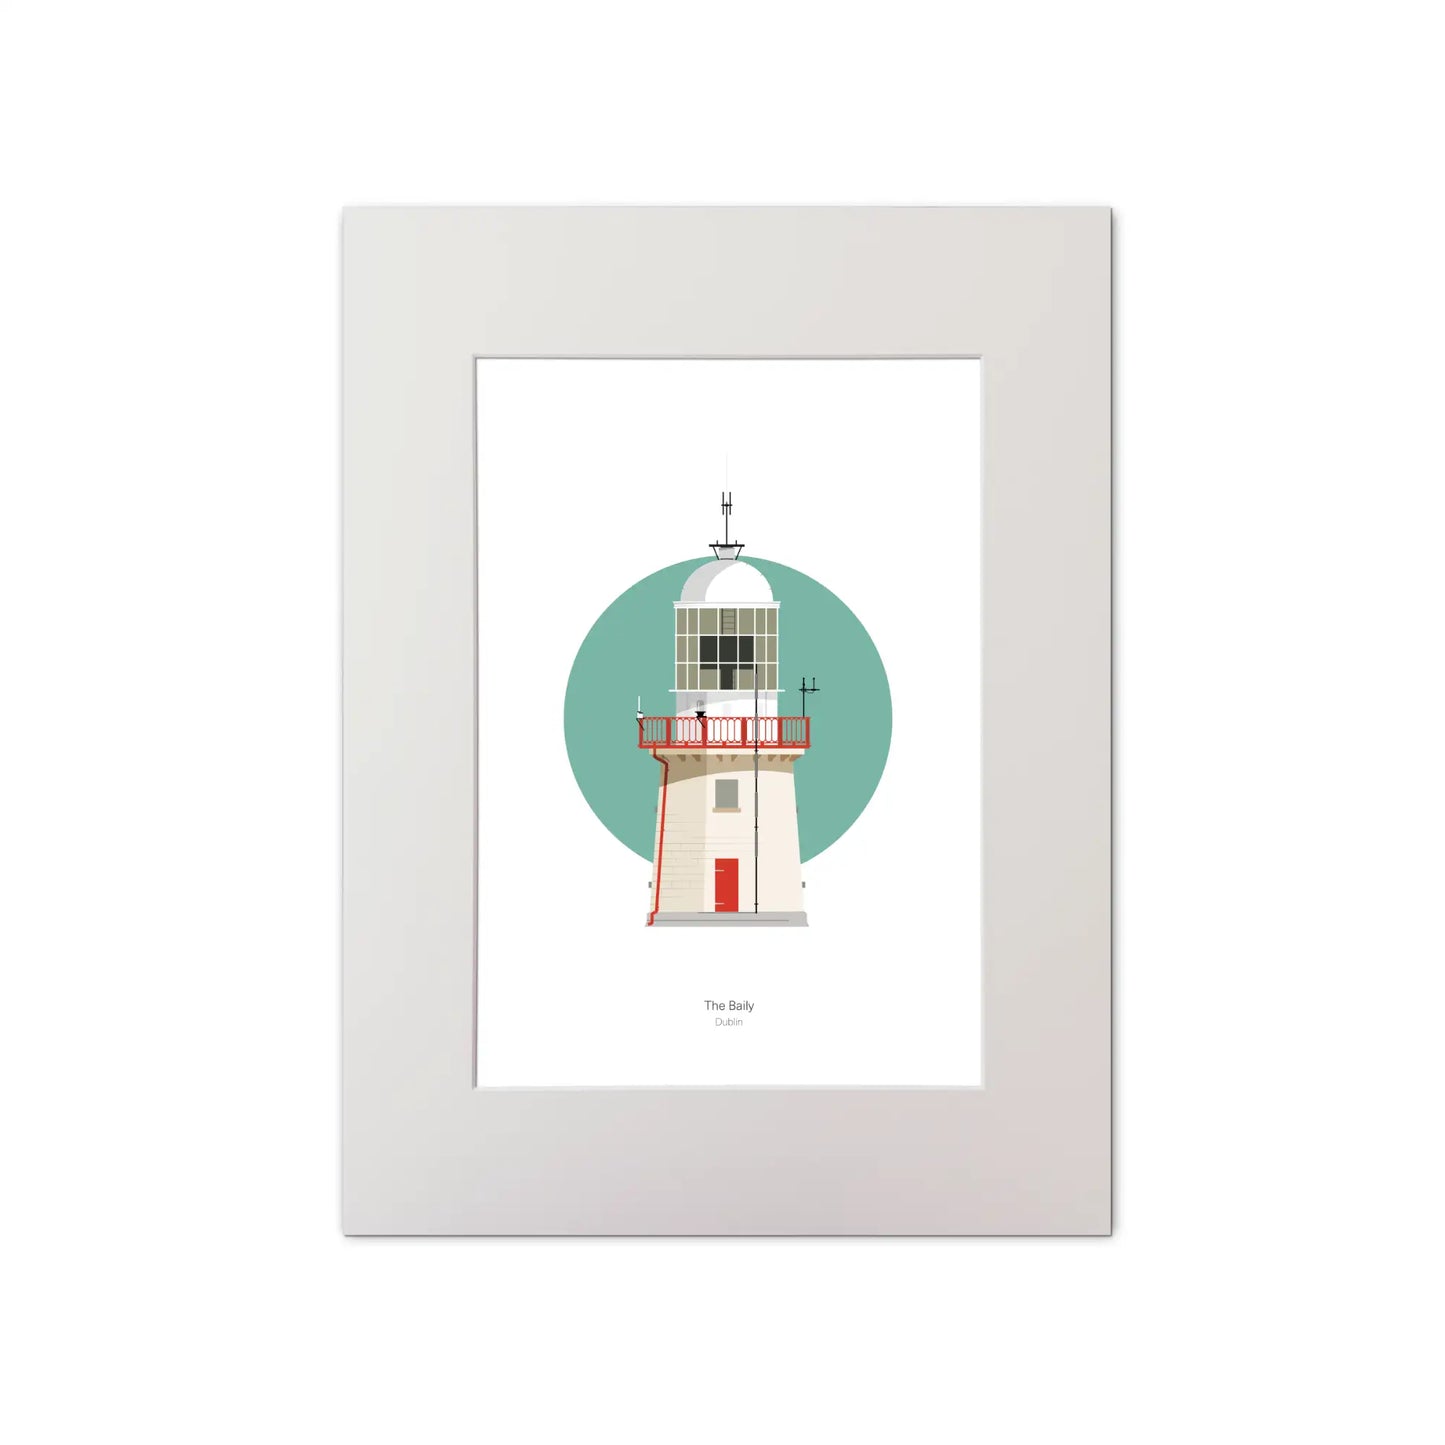 Illustration of The Baily lighthouse on a white background inside light blue square, mounted and measuring 30x40cm.